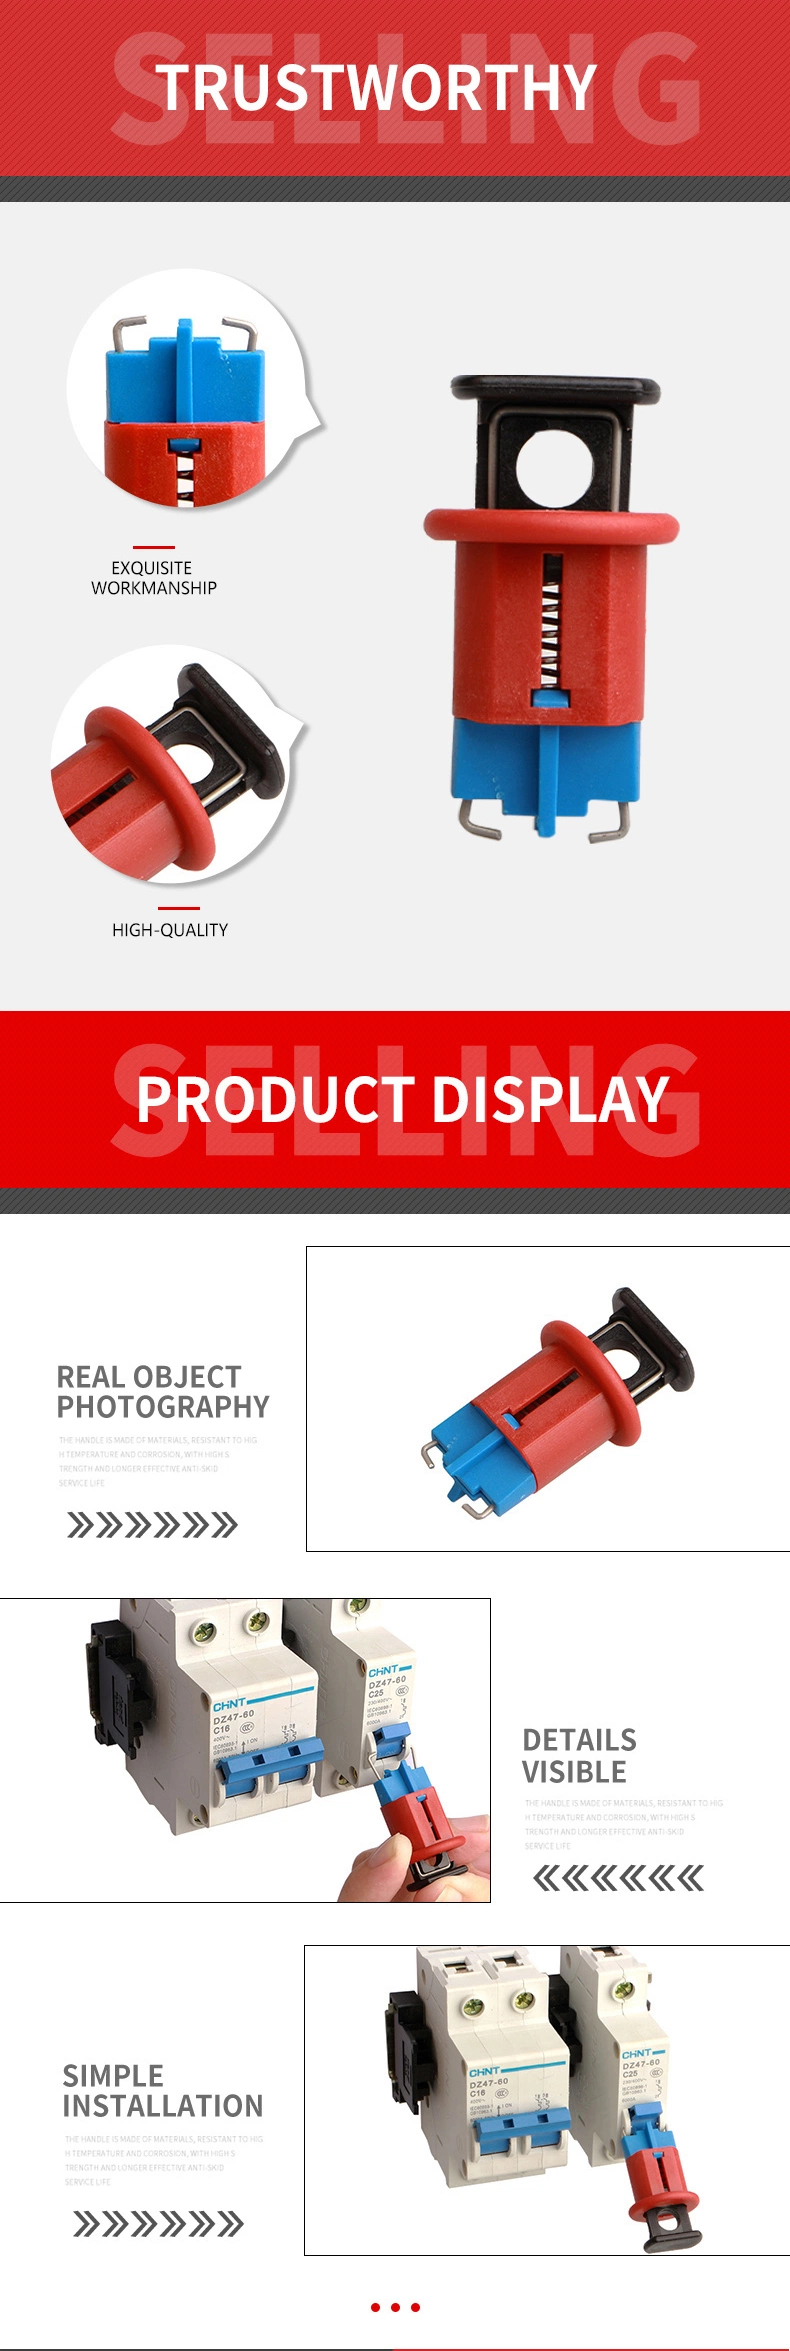 ABS Safety Industry Miniature Circuit Breaker Lockout Loto Security Lockout Tagout Manufacturer